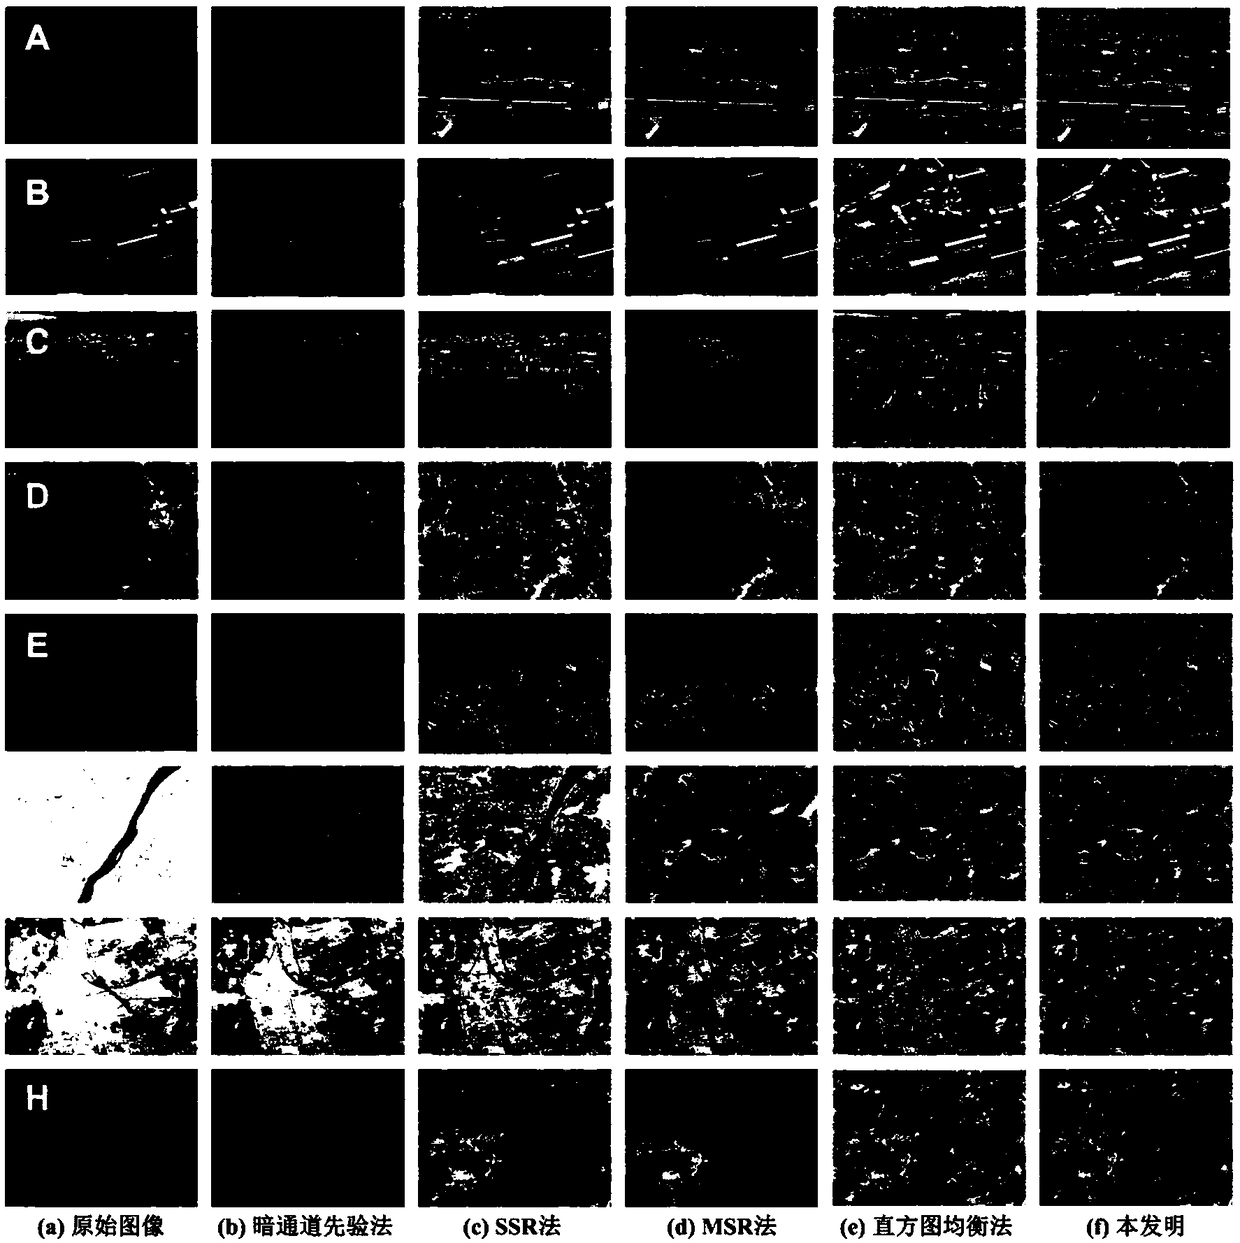 A smog elimination method of a remote sensing image based on content and characteristics and a multi-scale model